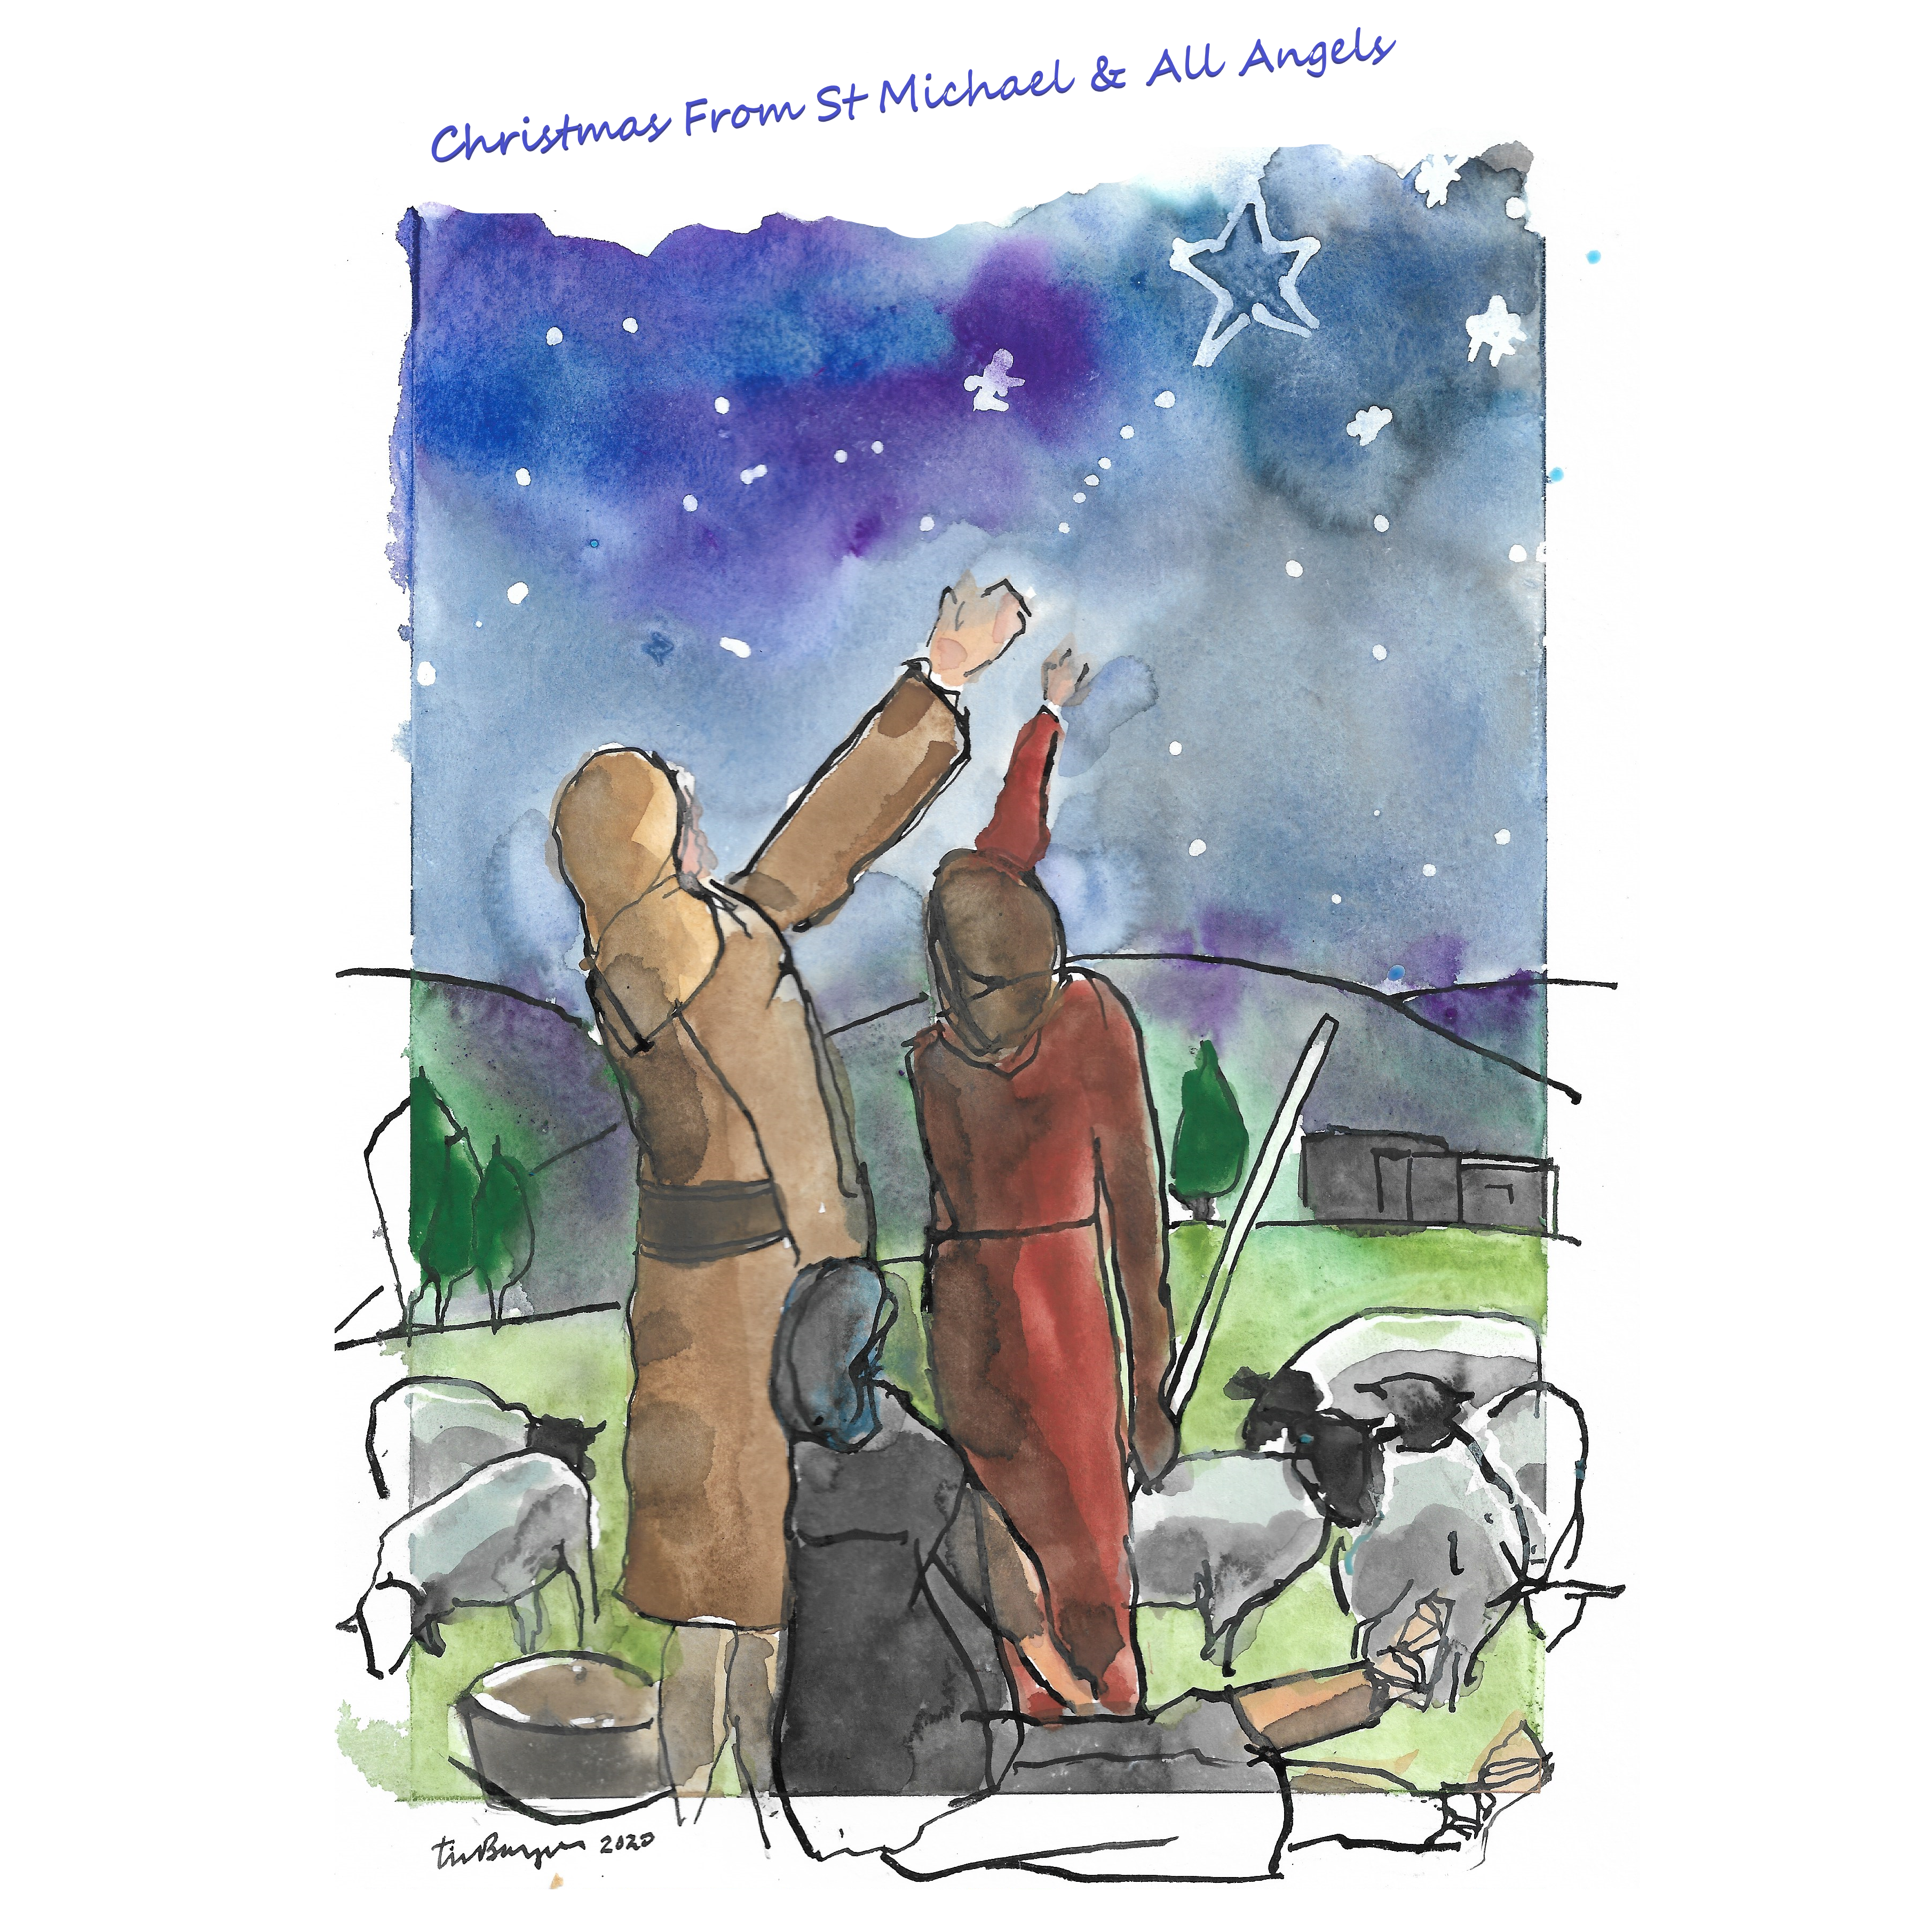 image of Christmas From St Michael & All Angels album cover